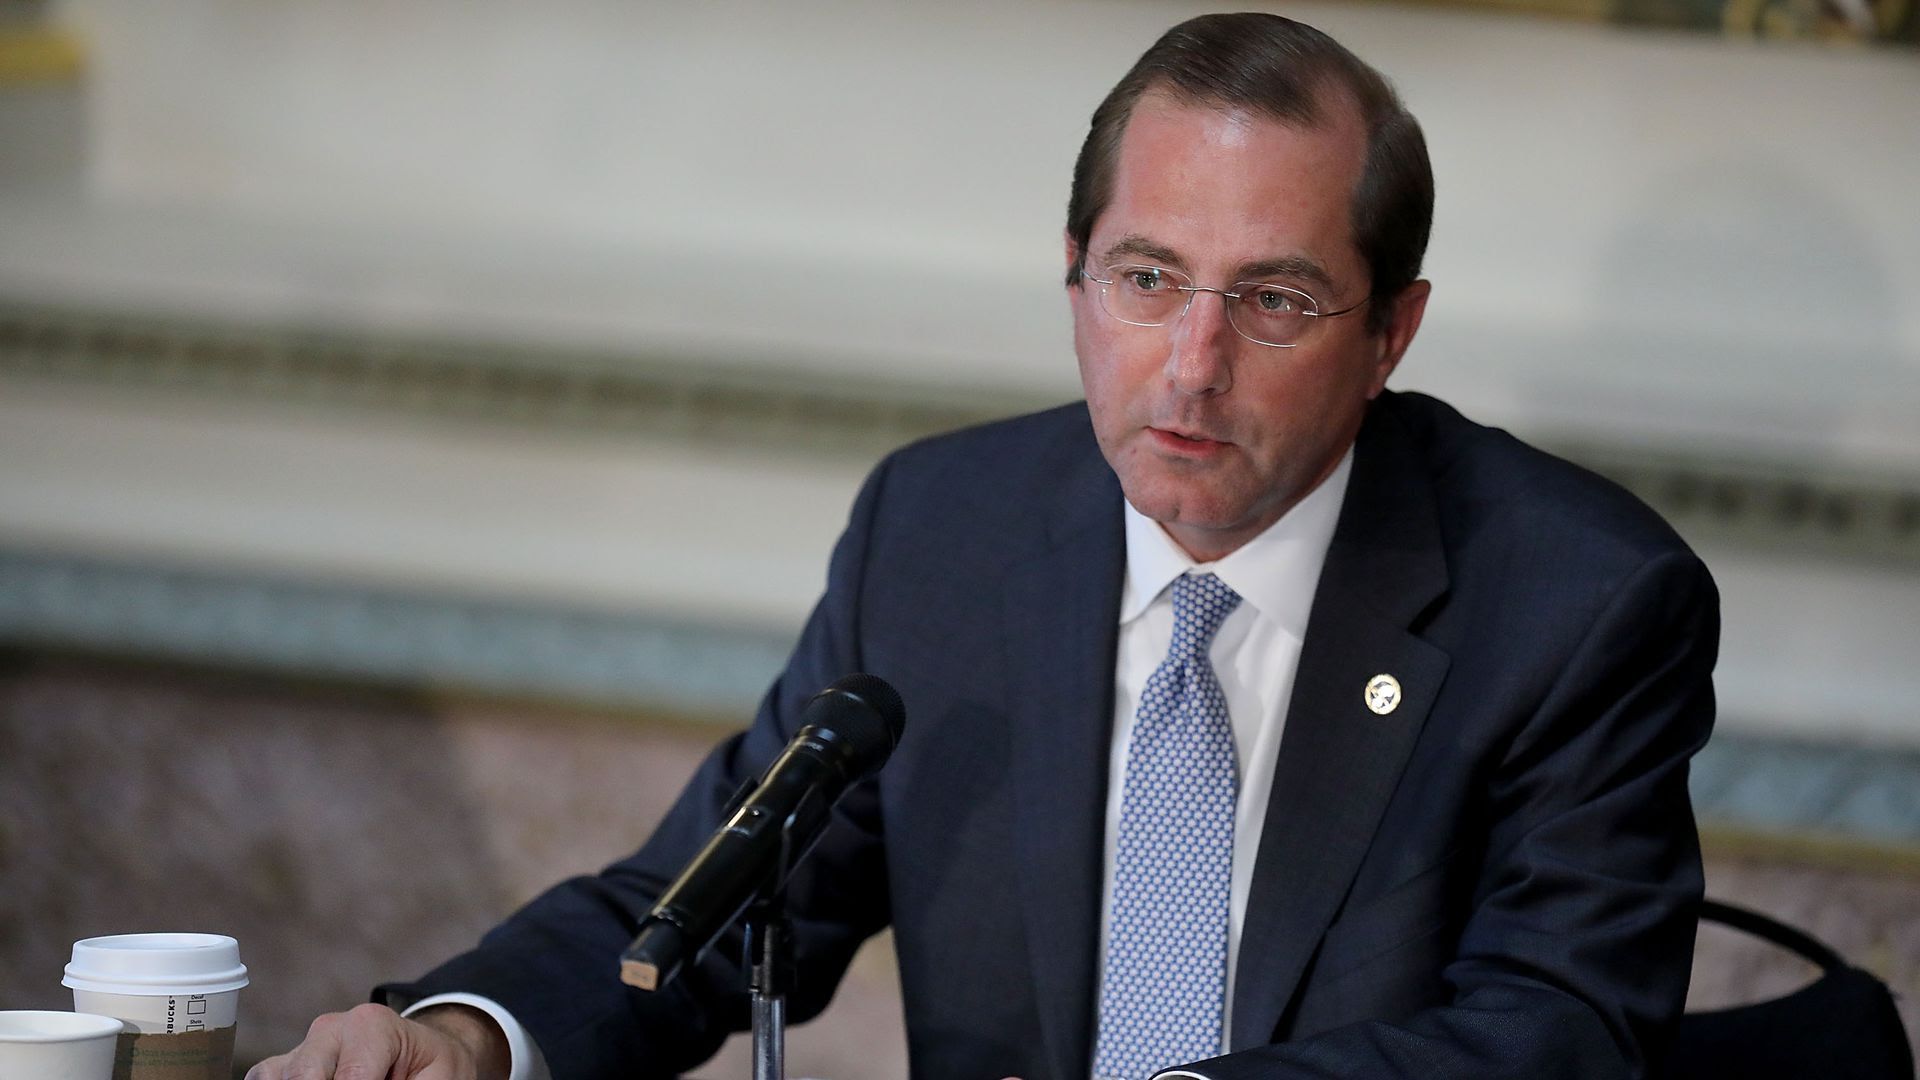 This is Health and Human Service Secretary Alex Azar, talking into a microphone